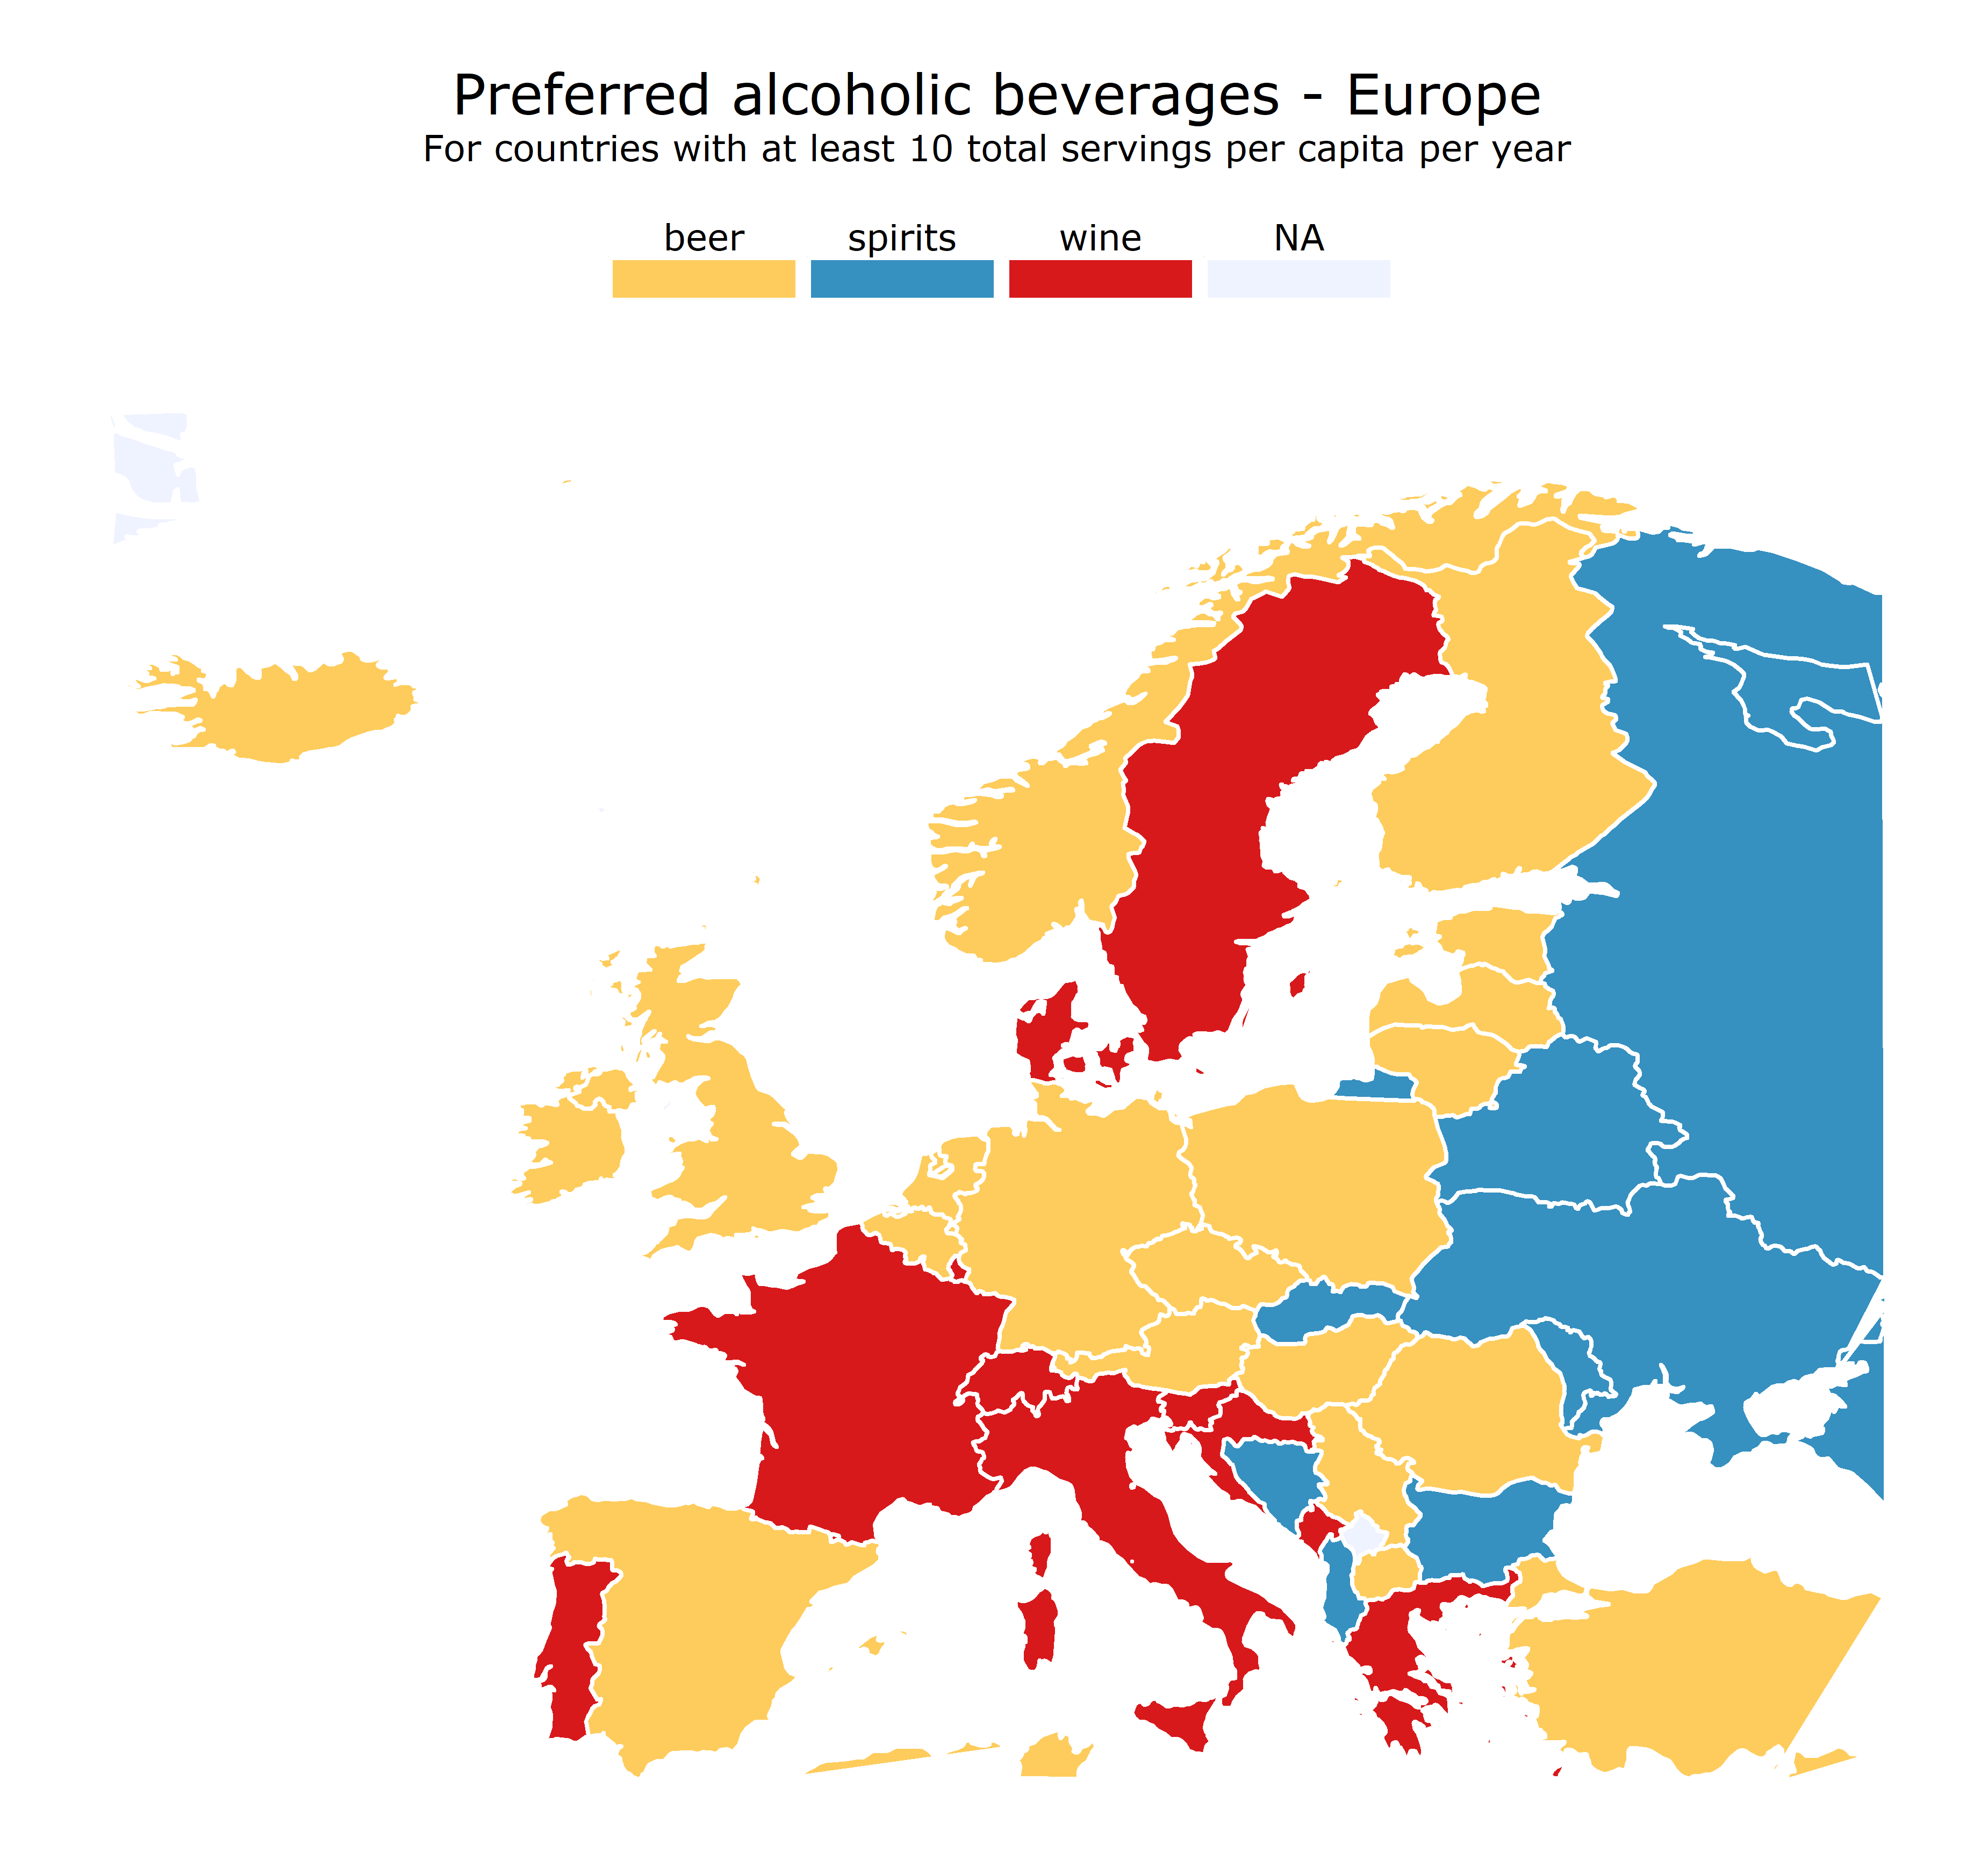 Preferred alcoholic beverages in Europe - Tidy Tuesday week 13